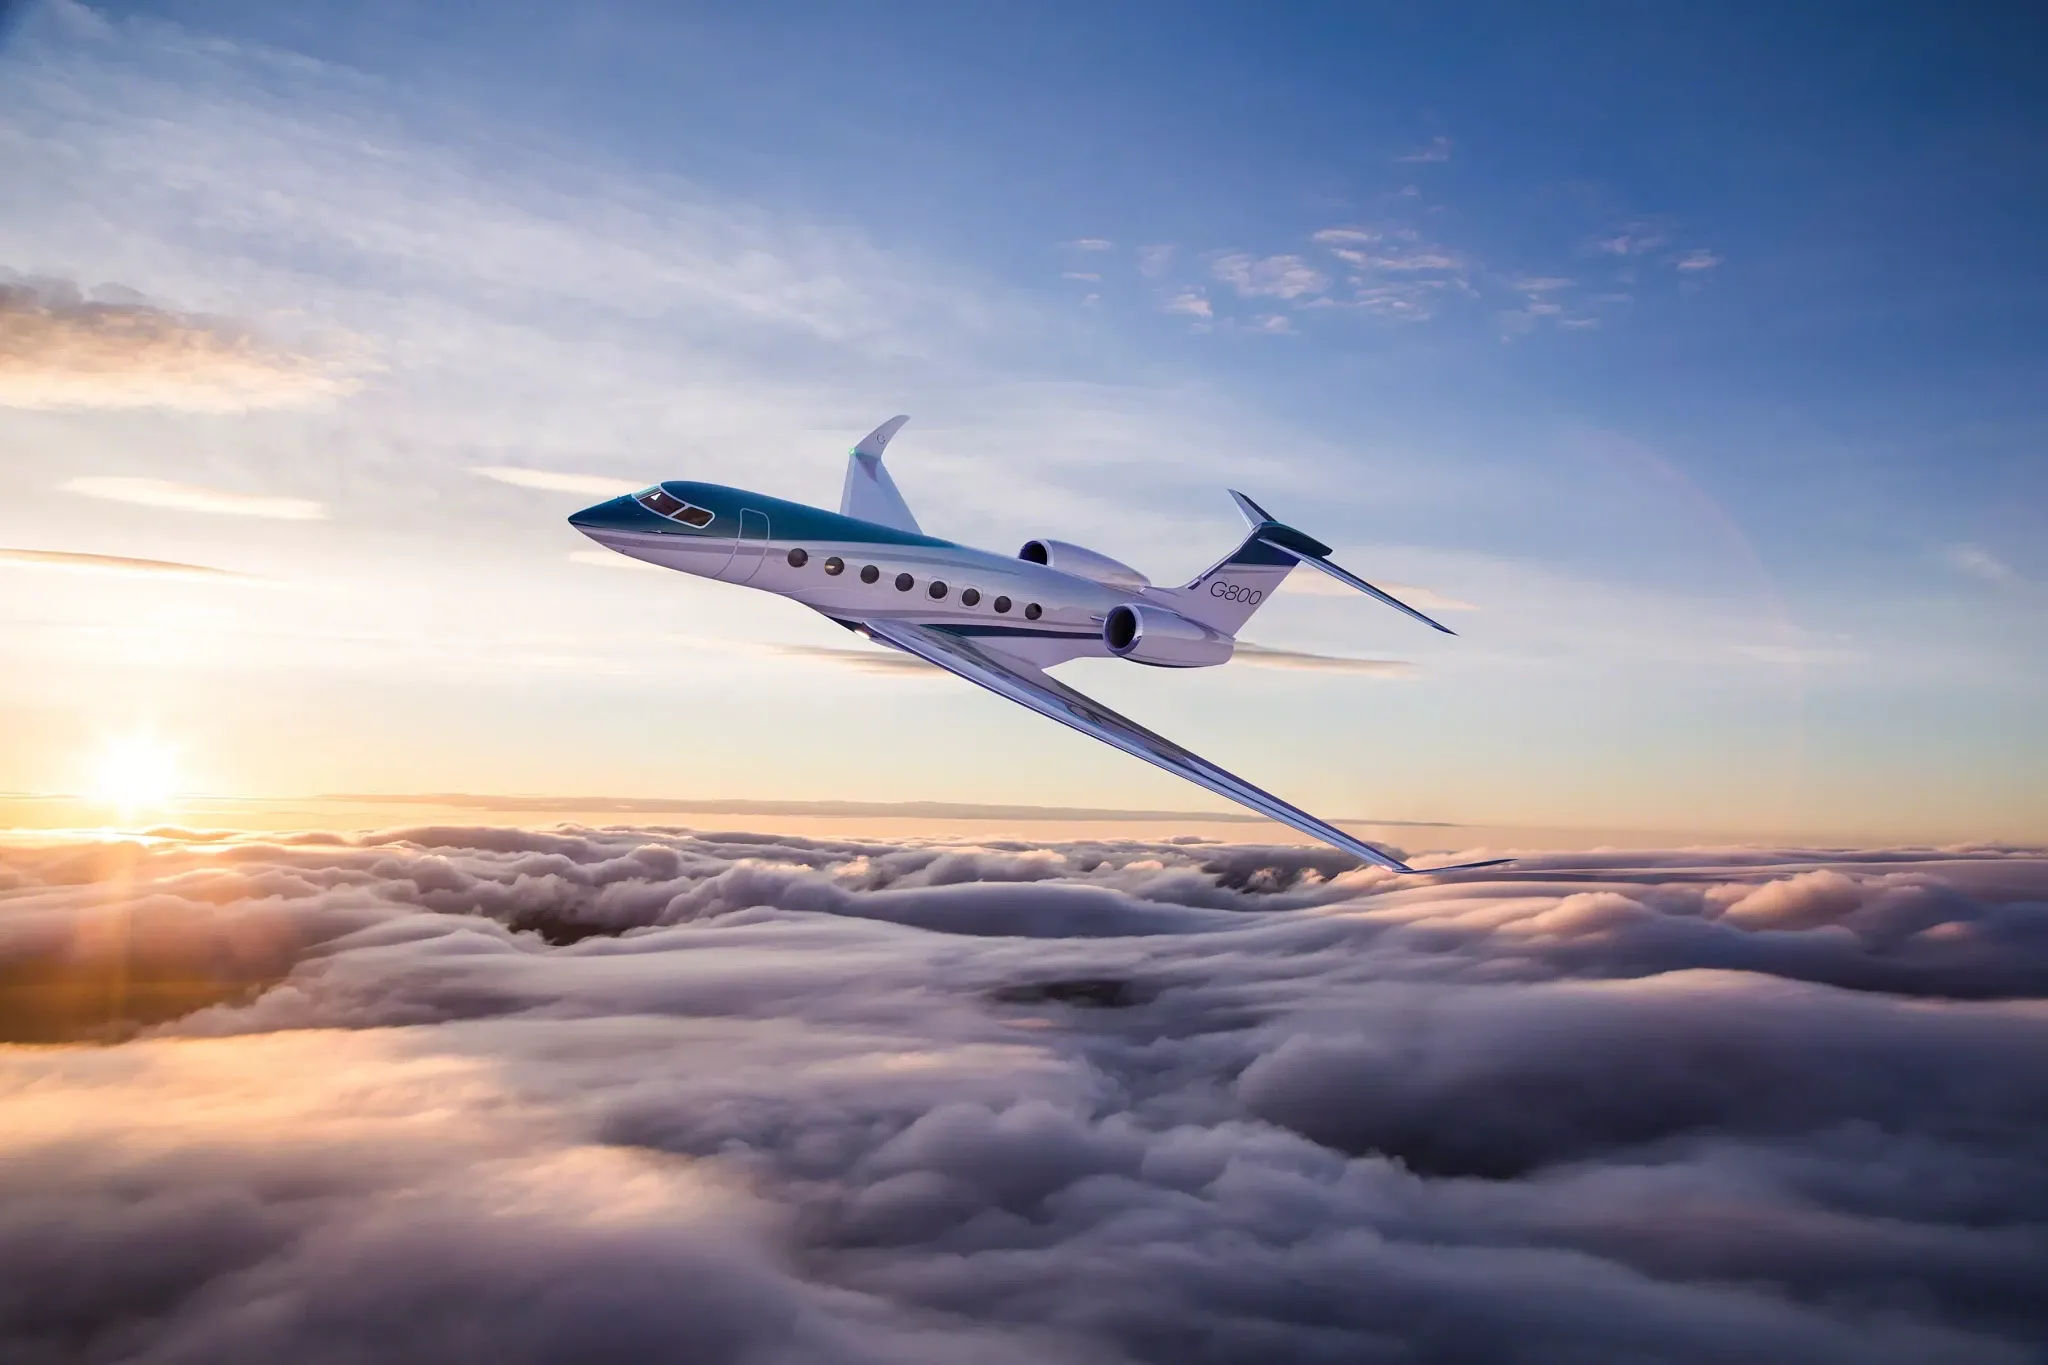 A Gulfstream G800 flying above the clouds.